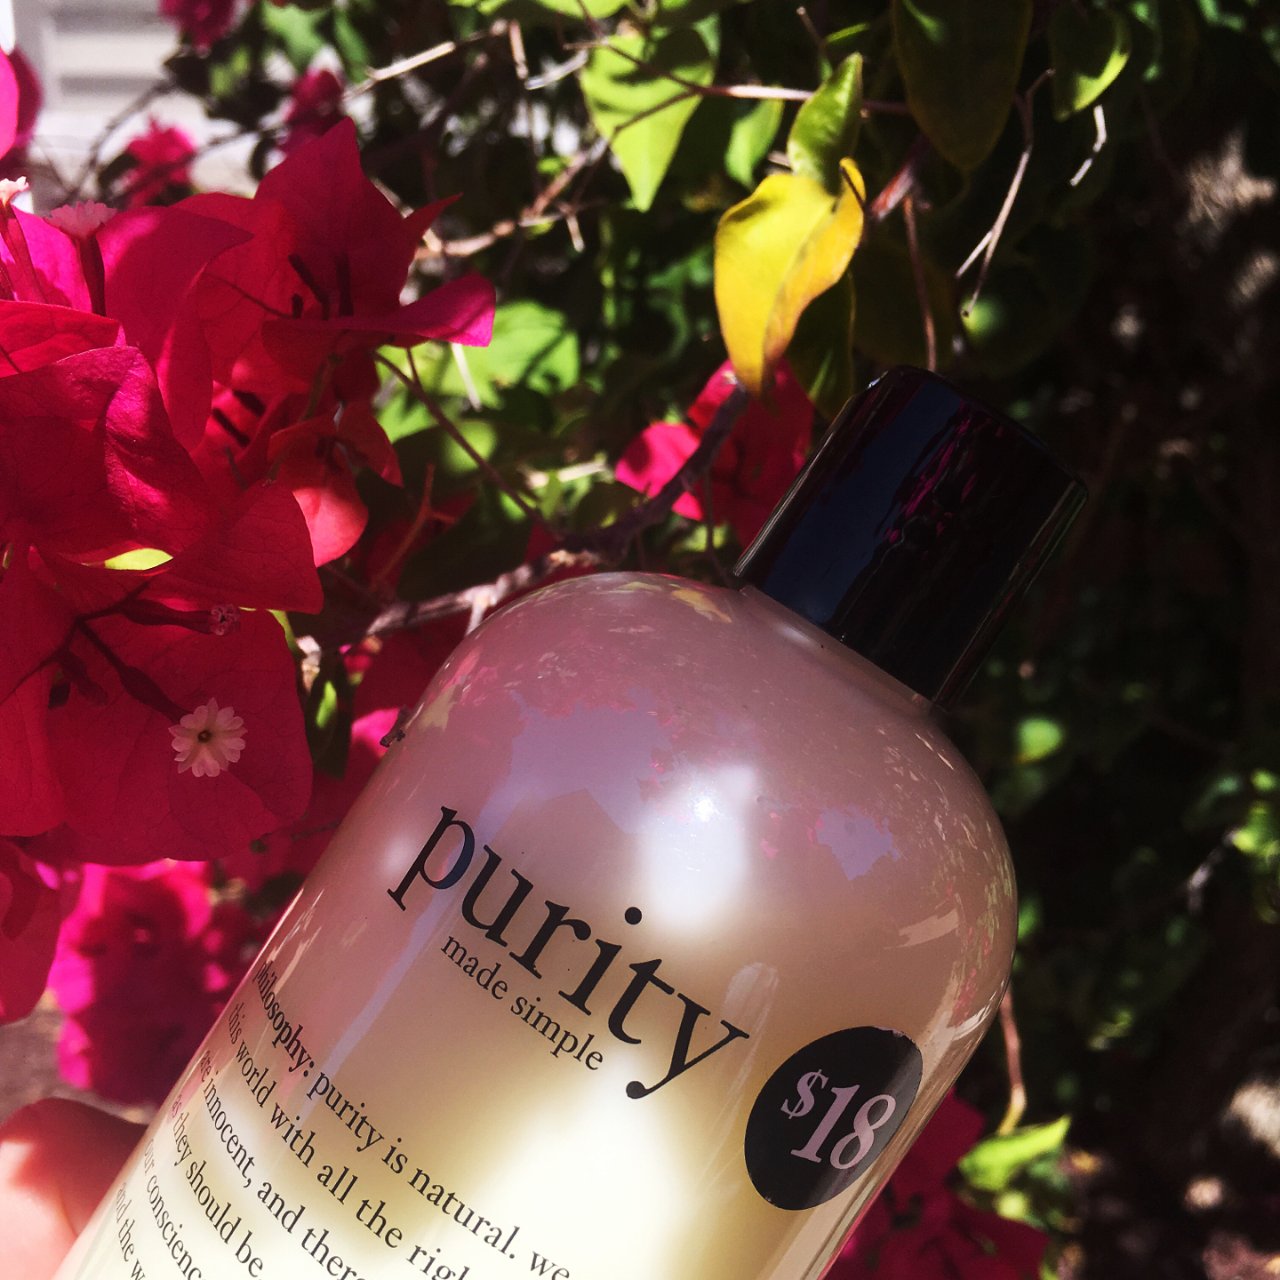 Purity facial cleanser,洗面奶